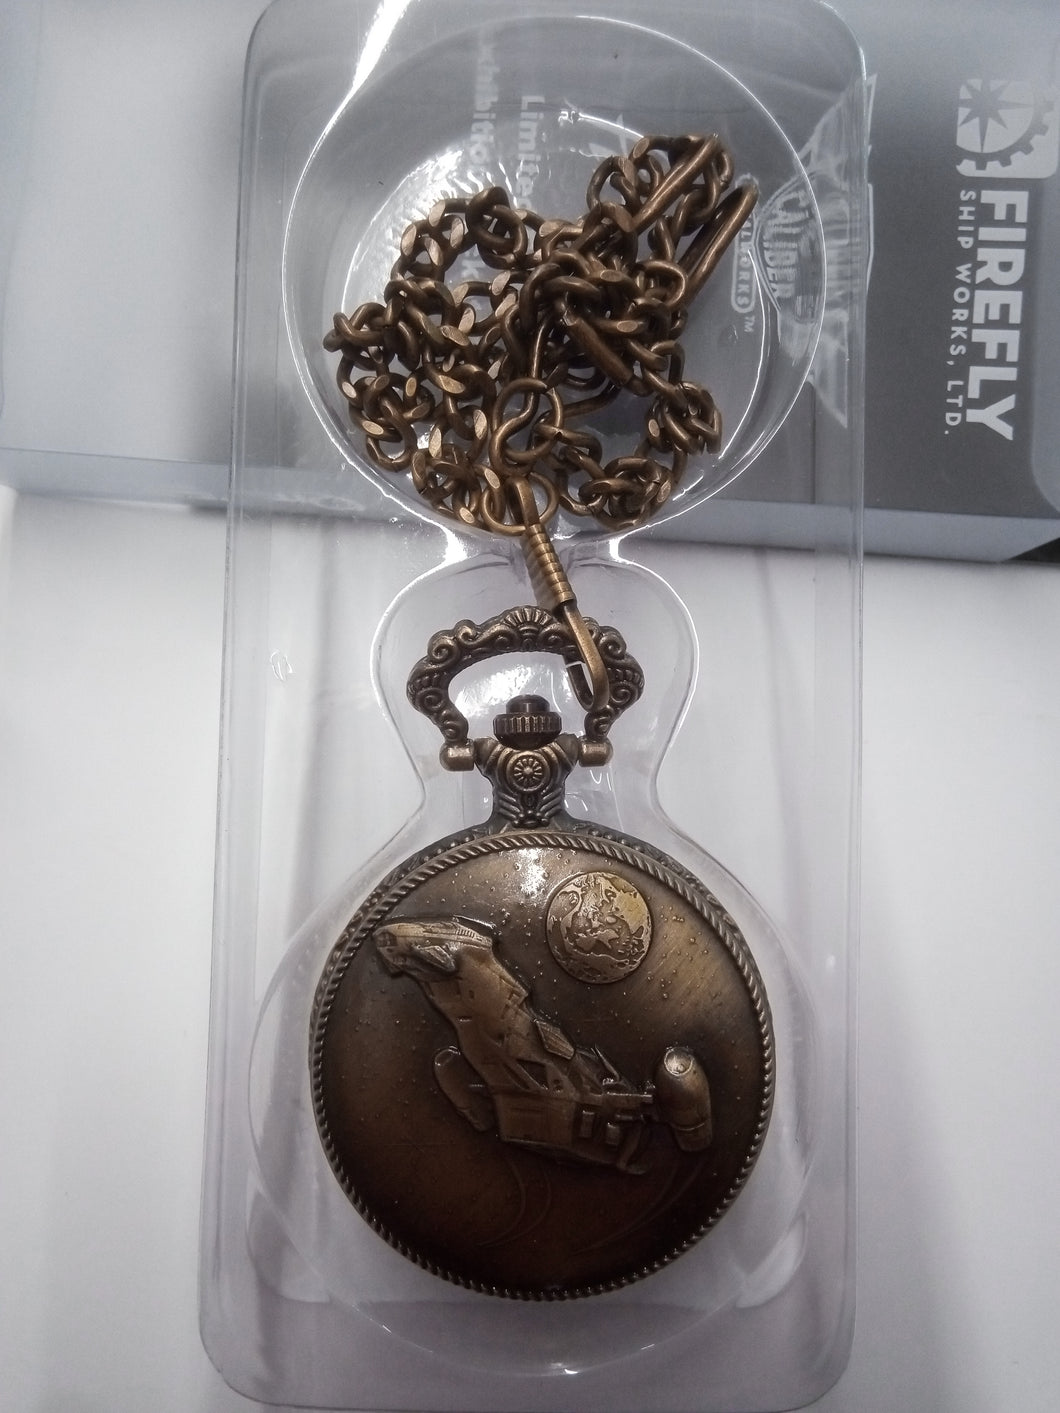 Firefly Limited edition Exhibition Pocket watch